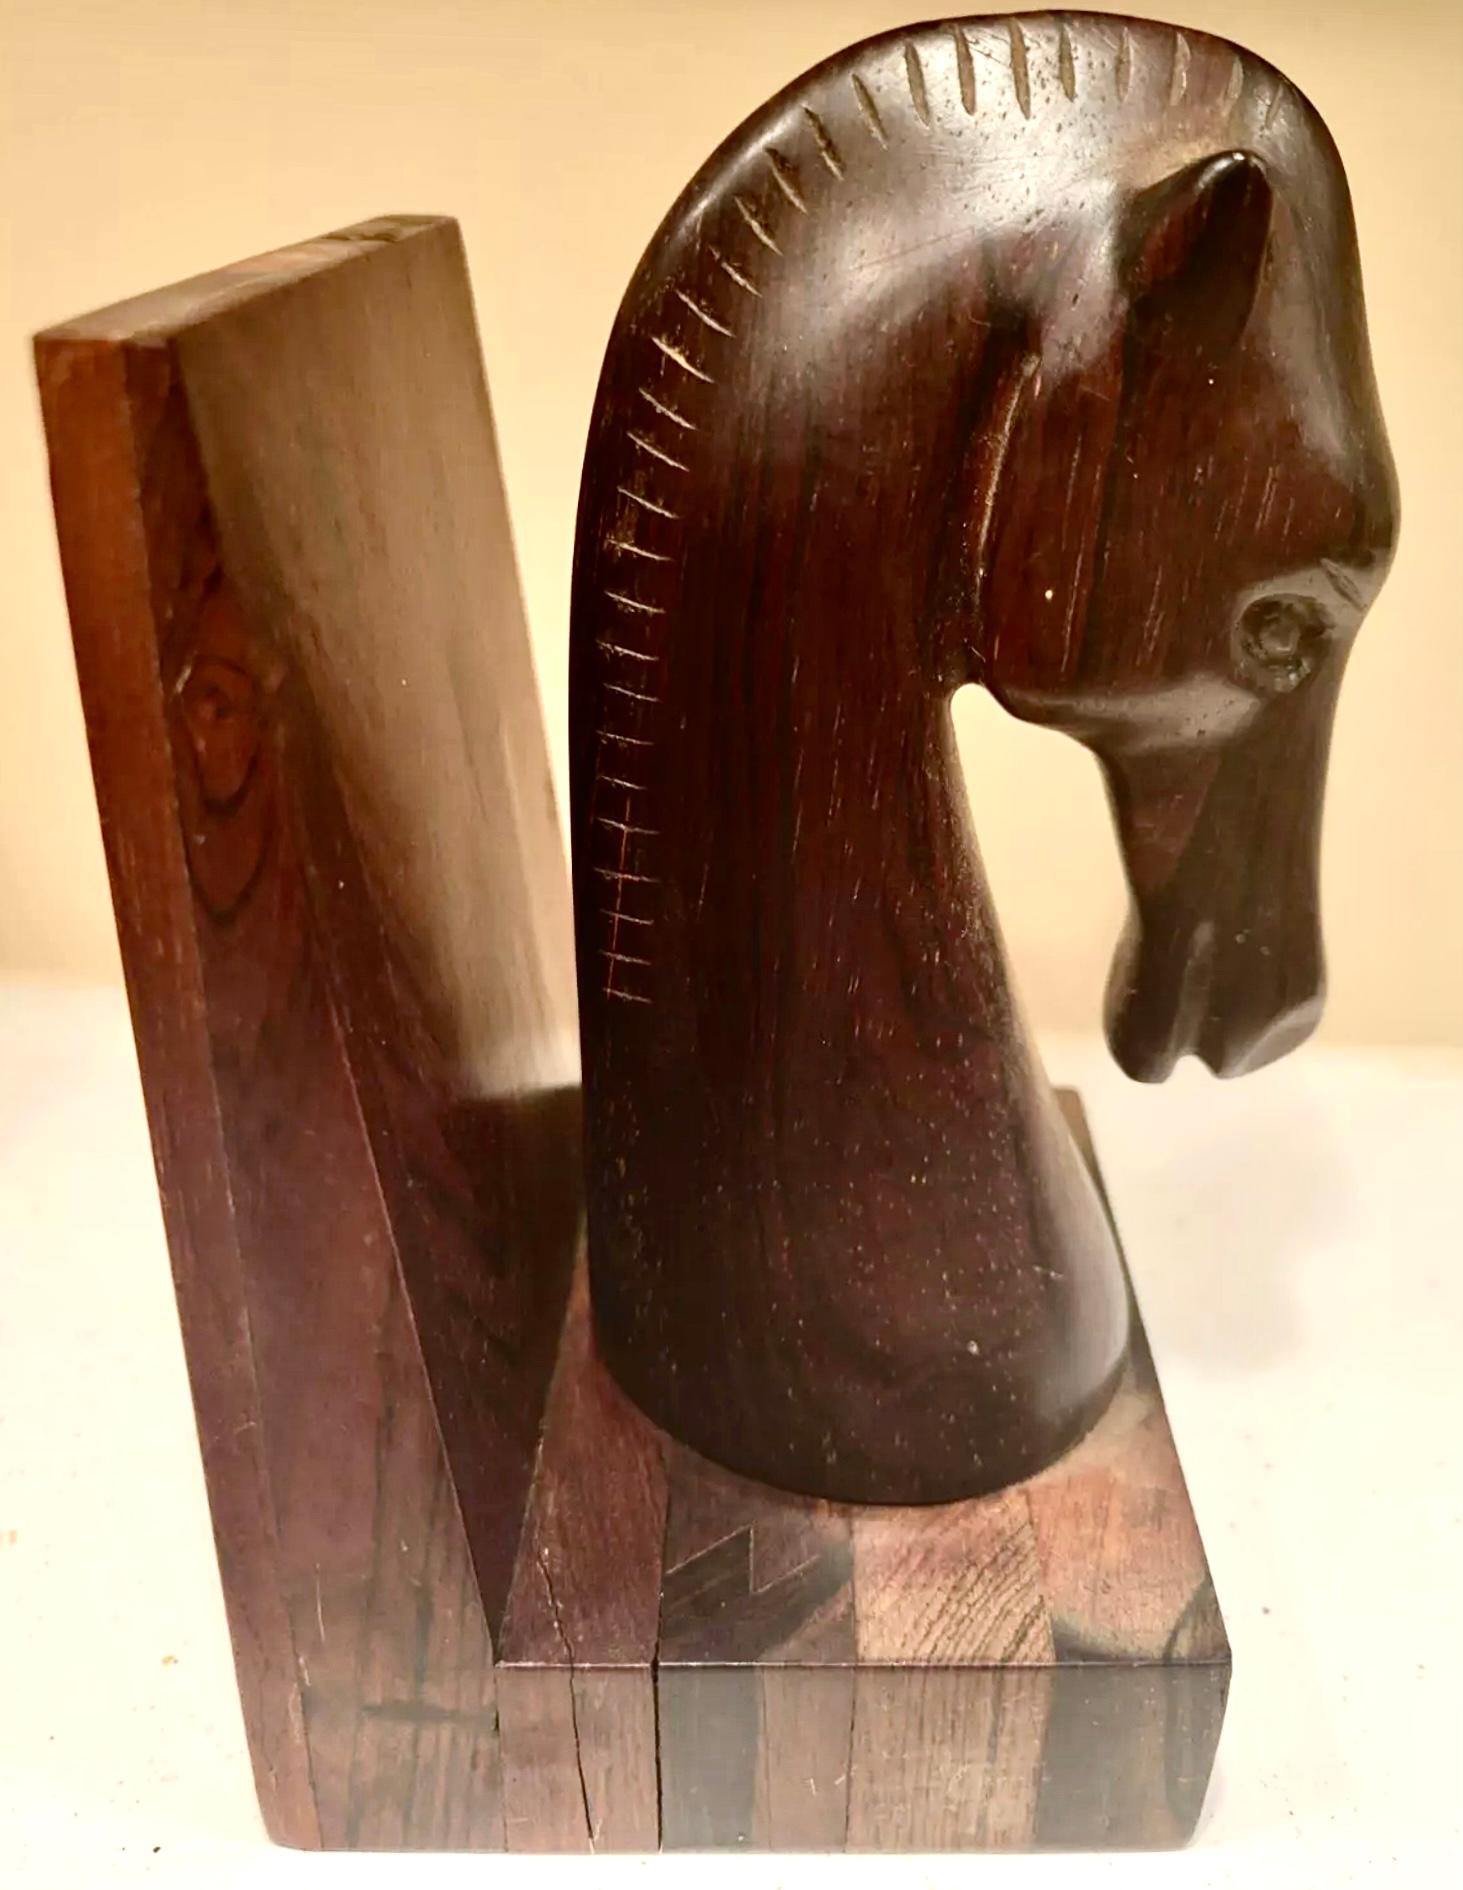 Jean Gillon Mid-Century Jacaranda Equine Sculptural Bookends, Brazil, 1960s.  Handcrafted with hard rosewood (also known as jacaranda), rare pair of horse head bookends by Jean Gillon for Italma Wood Art, 1960s.  Gorgeous clean clean lines with